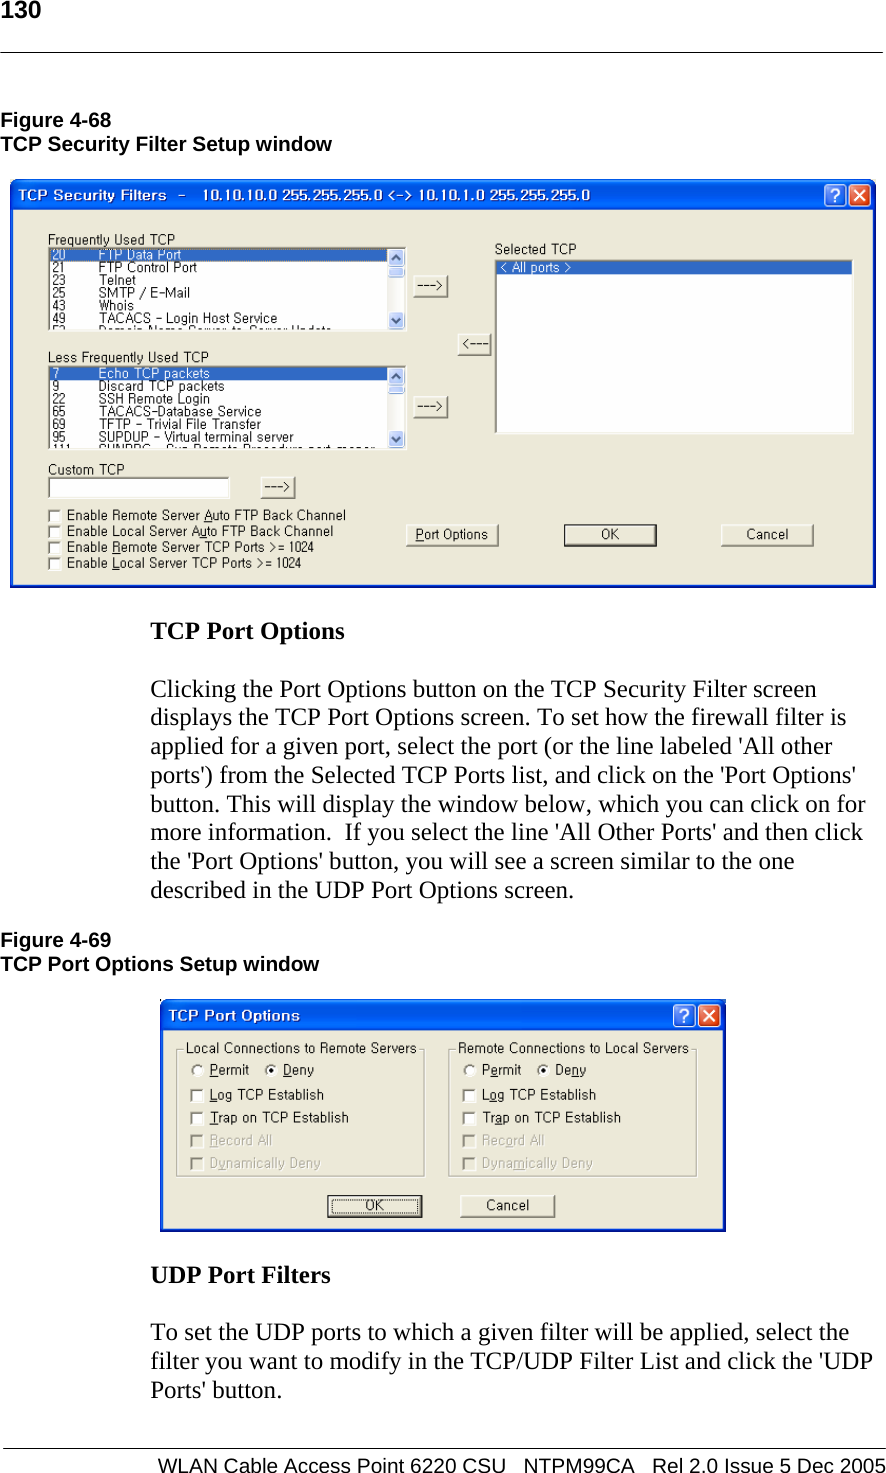   130  WLAN Cable Access Point 6220 CSU   NTPM99CA   Rel 2.0 Issue 5 Dec 2005 Figure 4-68 TCP Security Filter Setup window    TCP Port Options   Clicking the Port Options button on the TCP Security Filter screen displays the TCP Port Options screen. To set how the firewall filter is applied for a given port, select the port (or the line labeled &apos;All other ports&apos;) from the Selected TCP Ports list, and click on the &apos;Port Options&apos; button. This will display the window below, which you can click on for more information.  If you select the line &apos;All Other Ports&apos; and then click the &apos;Port Options&apos; button, you will see a screen similar to the one described in the UDP Port Options screen.  Figure 4-69 TCP Port Options Setup window    UDP Port Filters   To set the UDP ports to which a given filter will be applied, select the filter you want to modify in the TCP/UDP Filter List and click the &apos;UDP Ports&apos; button.   